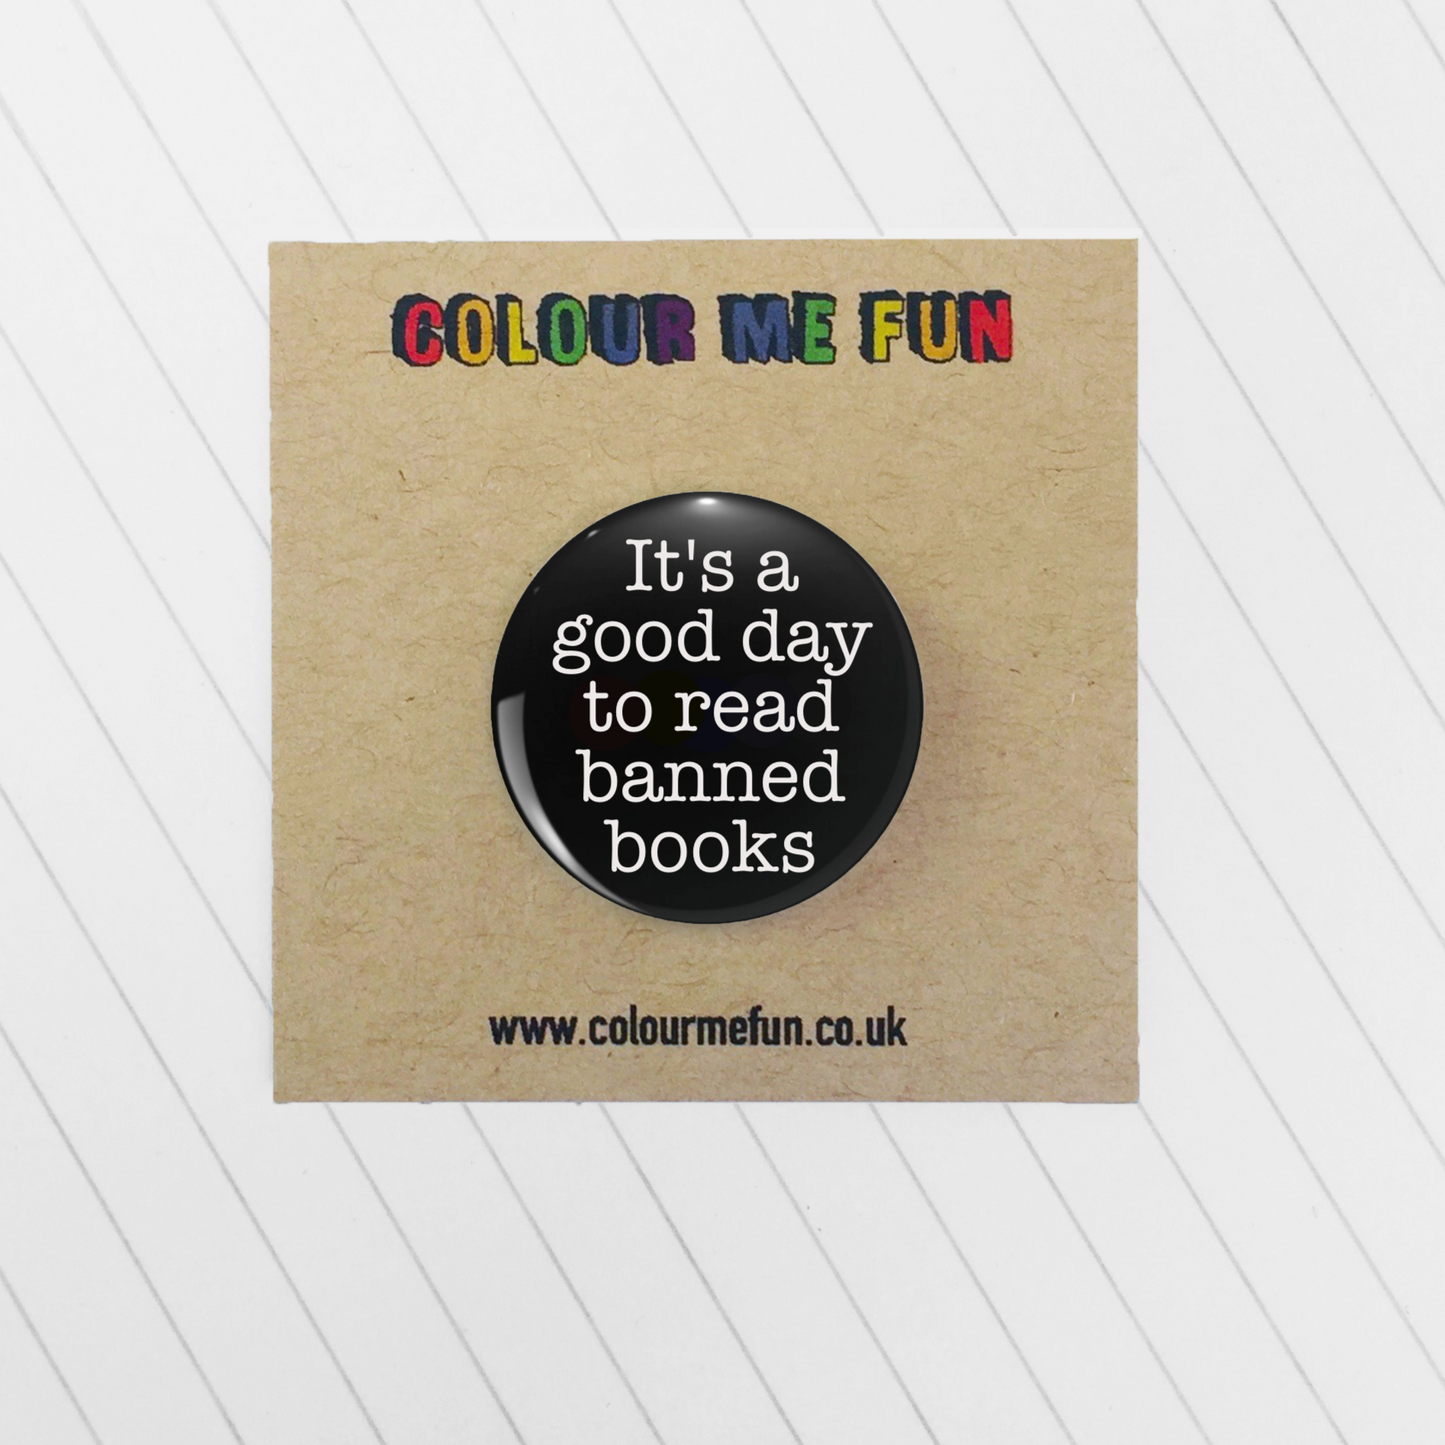 It's A Good Day to Read Banned Books - Book Lovers Pin Badge